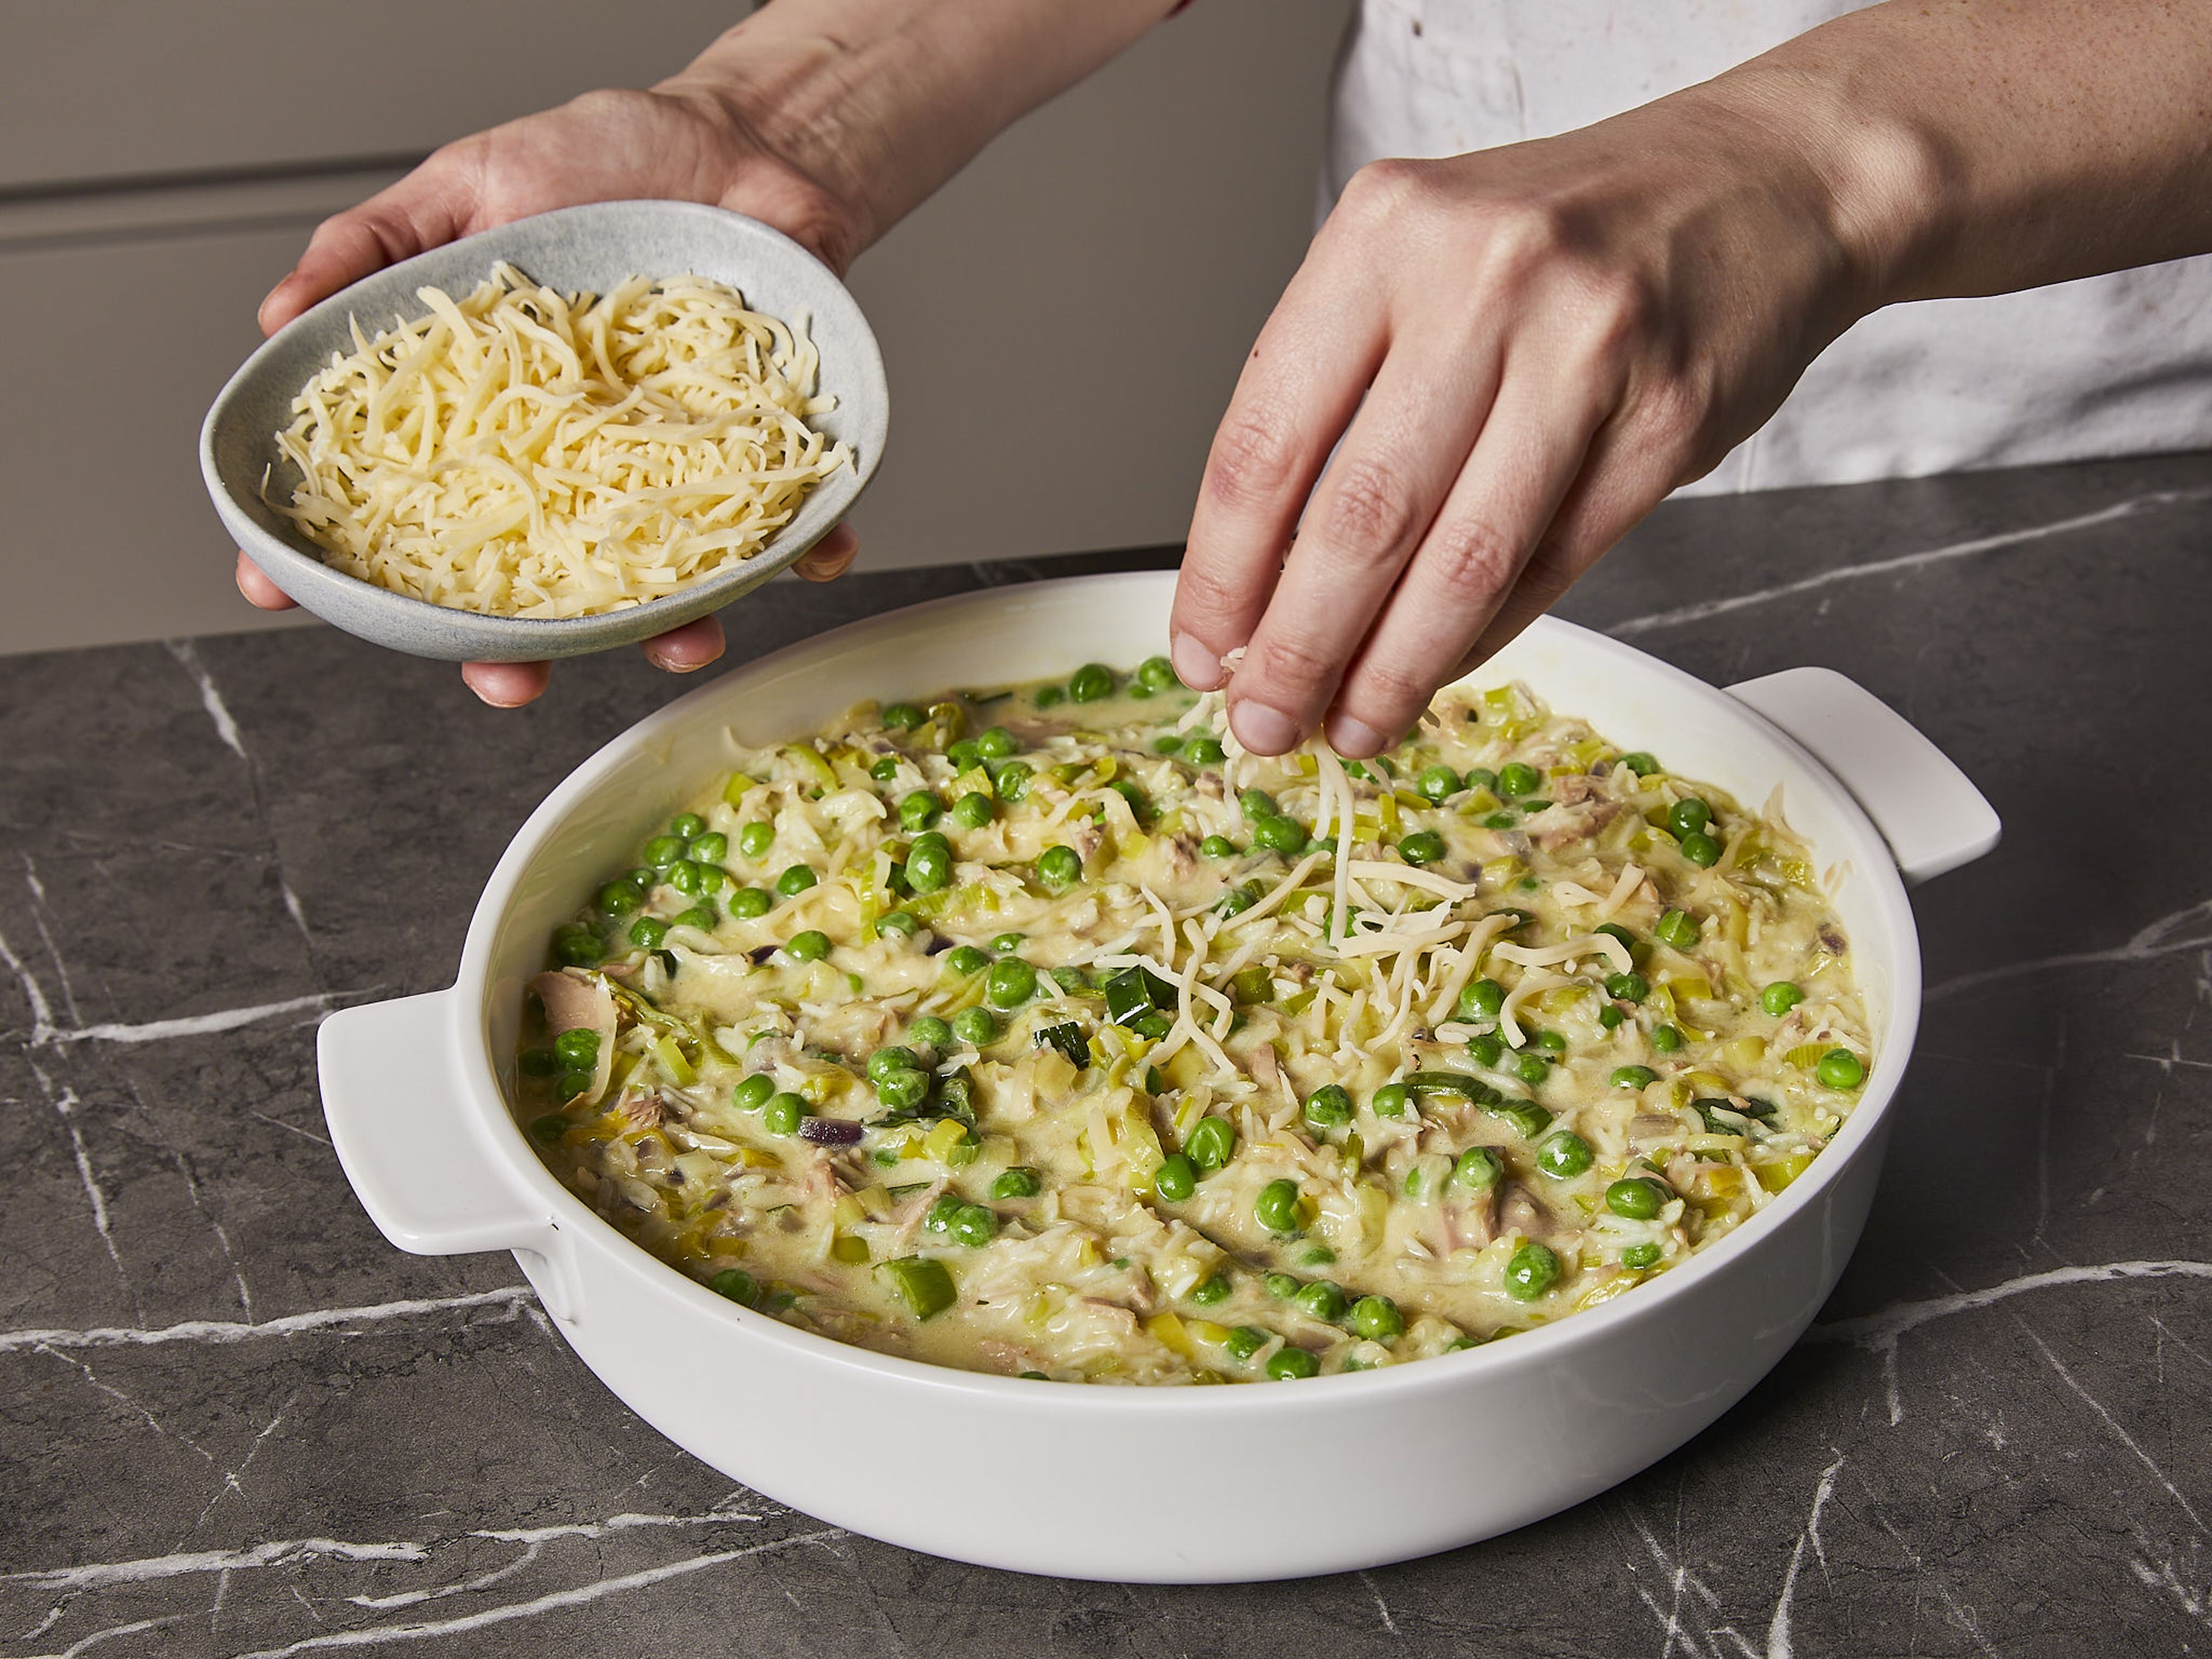 Stir in tuna, frozen peas and ¾ of the cheese. Mix until combined. Then pour everything into a baking dish and sprinkle with the remaining cheese. Bake in the oven for approx. 25 min. until the top turns golden brown. Garnish with remaining scallion greens.